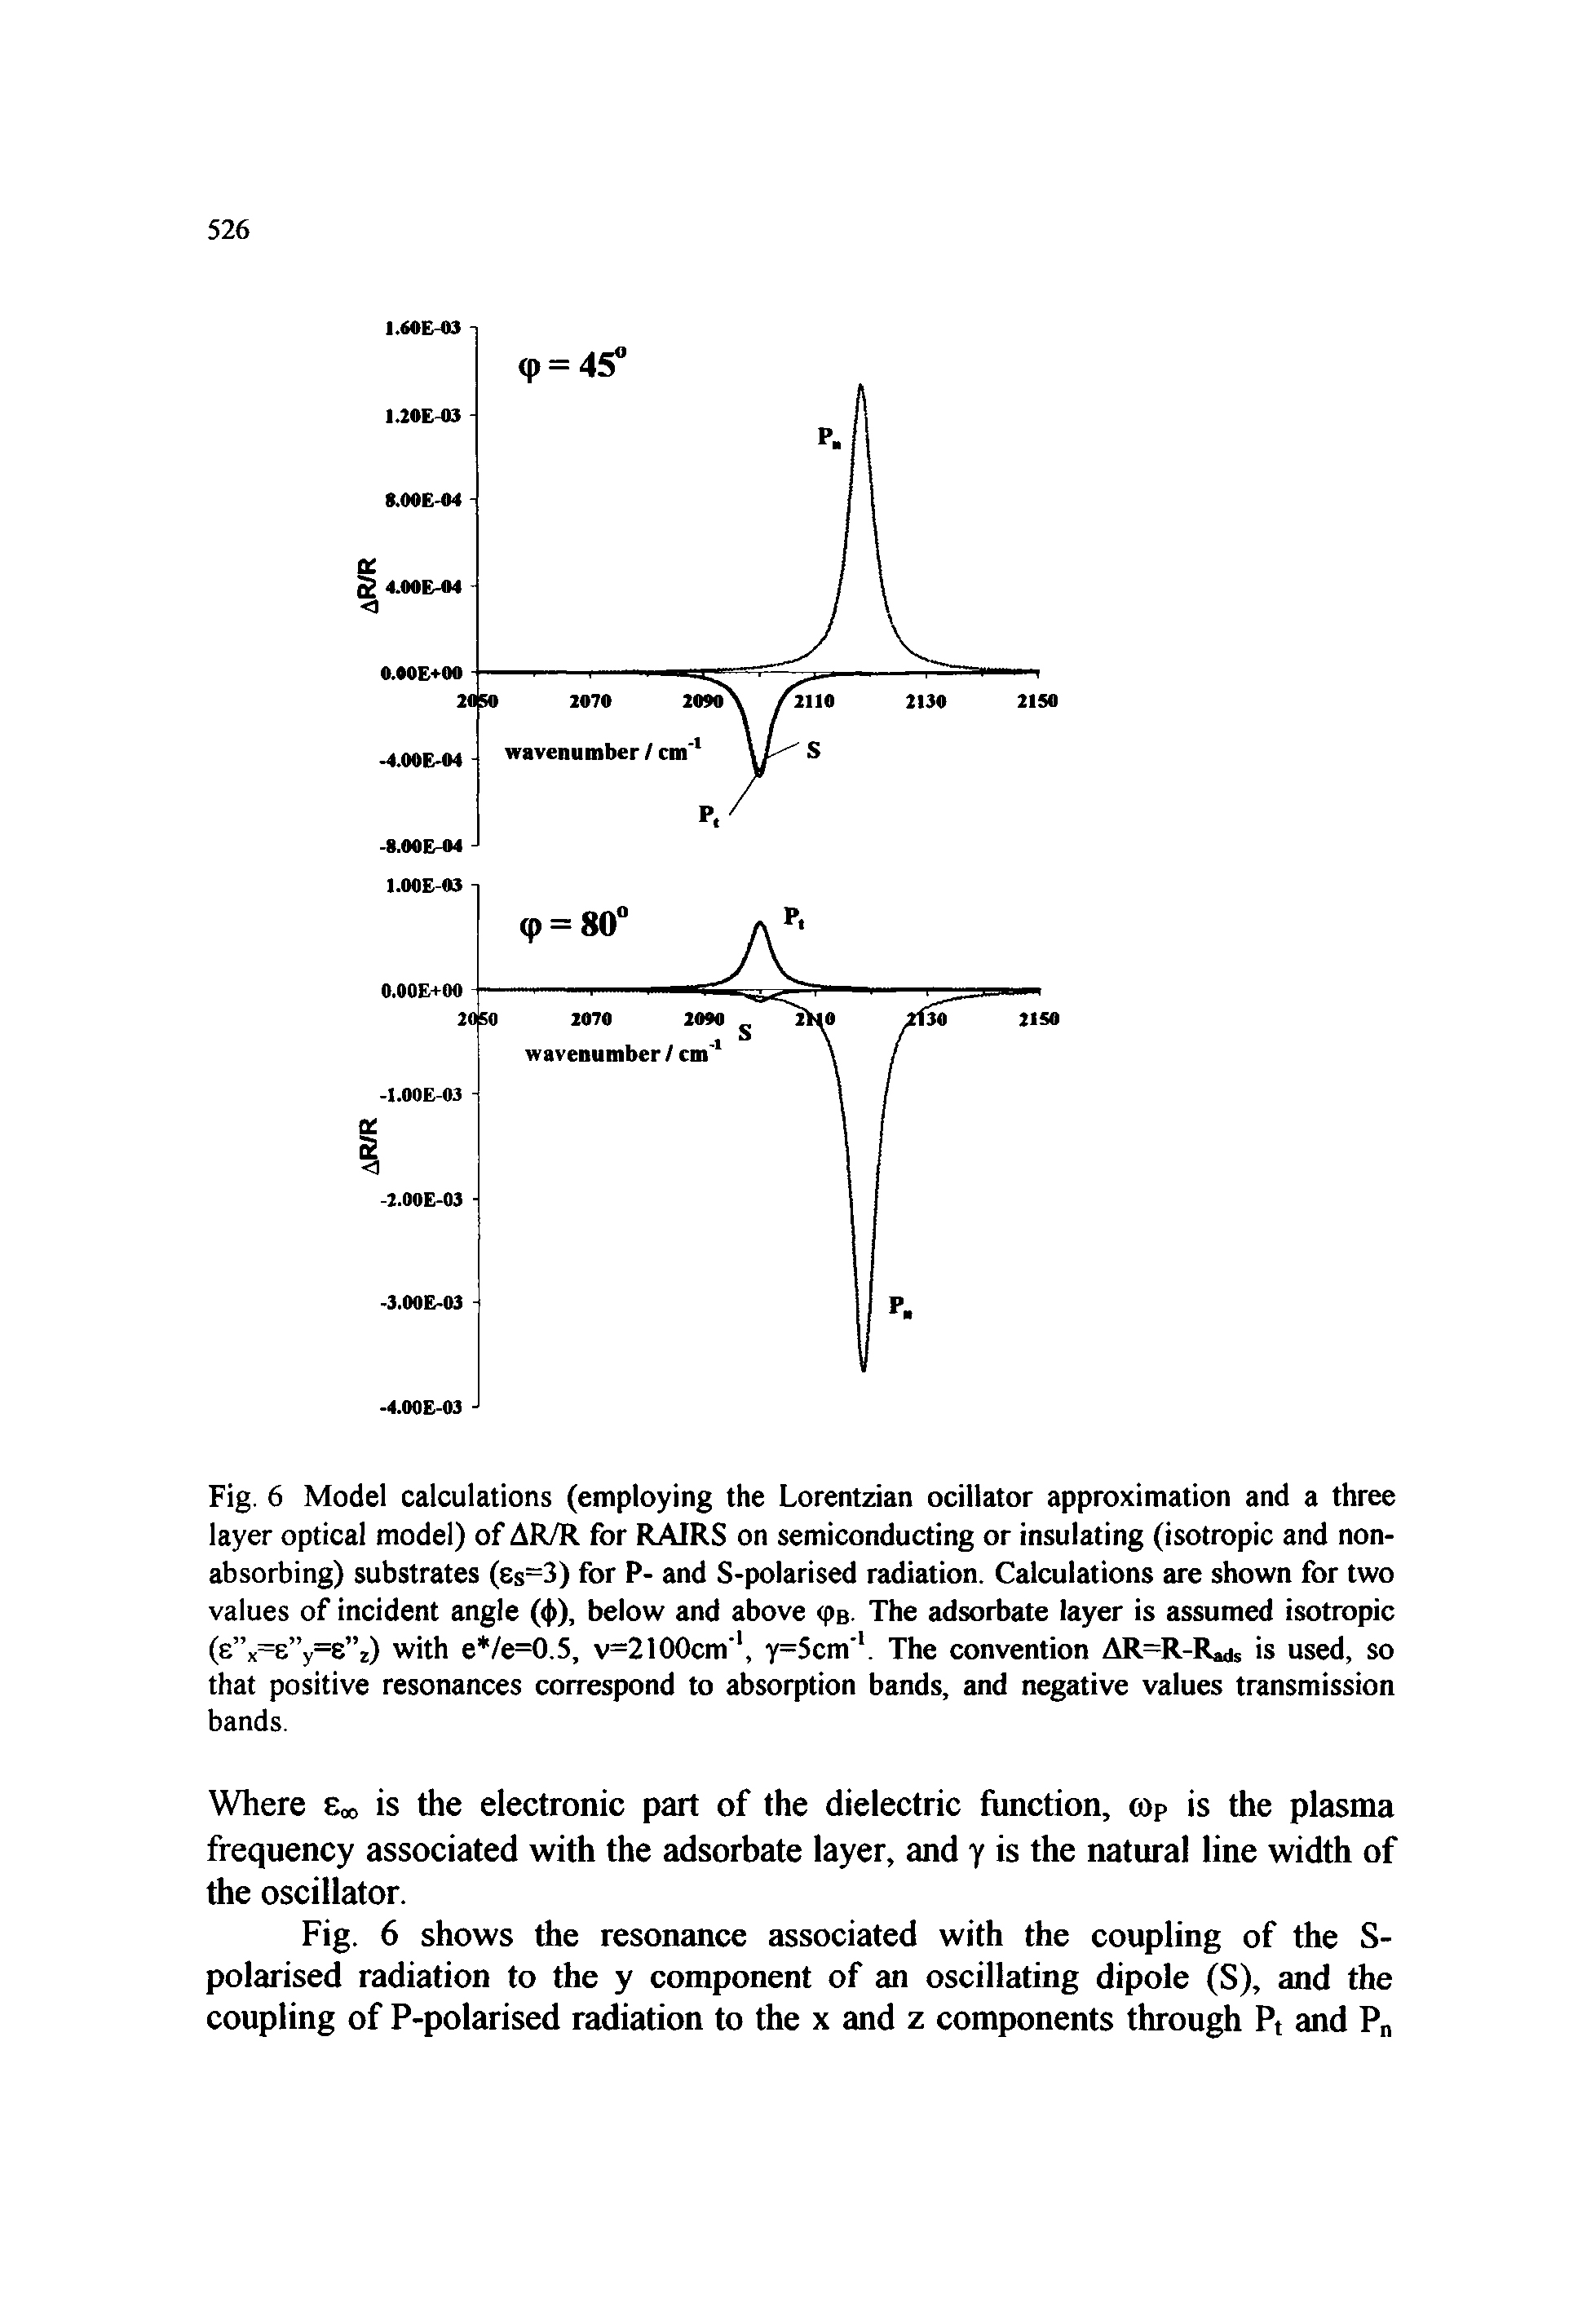 Fig. 6 Model calculations (employing the Lorentzian ocillator approximation and a three layer optical model) of AR/R for RAIRS on semiconducting or insulating (isotropic and nonabsorbing) substrates (ss=3) for P- and S-polarised radiation. Calculations are shown for two values of incident angle (<( ), below and above (pe- The adsorbate layer is assumed isotropic (e x=E y=s z) with e /e=0.5, v=2100cm, y=5cm . The convention AR=R-R ds is used, so that positive resonances correspond to absorption bands, and negative values transmission bands.